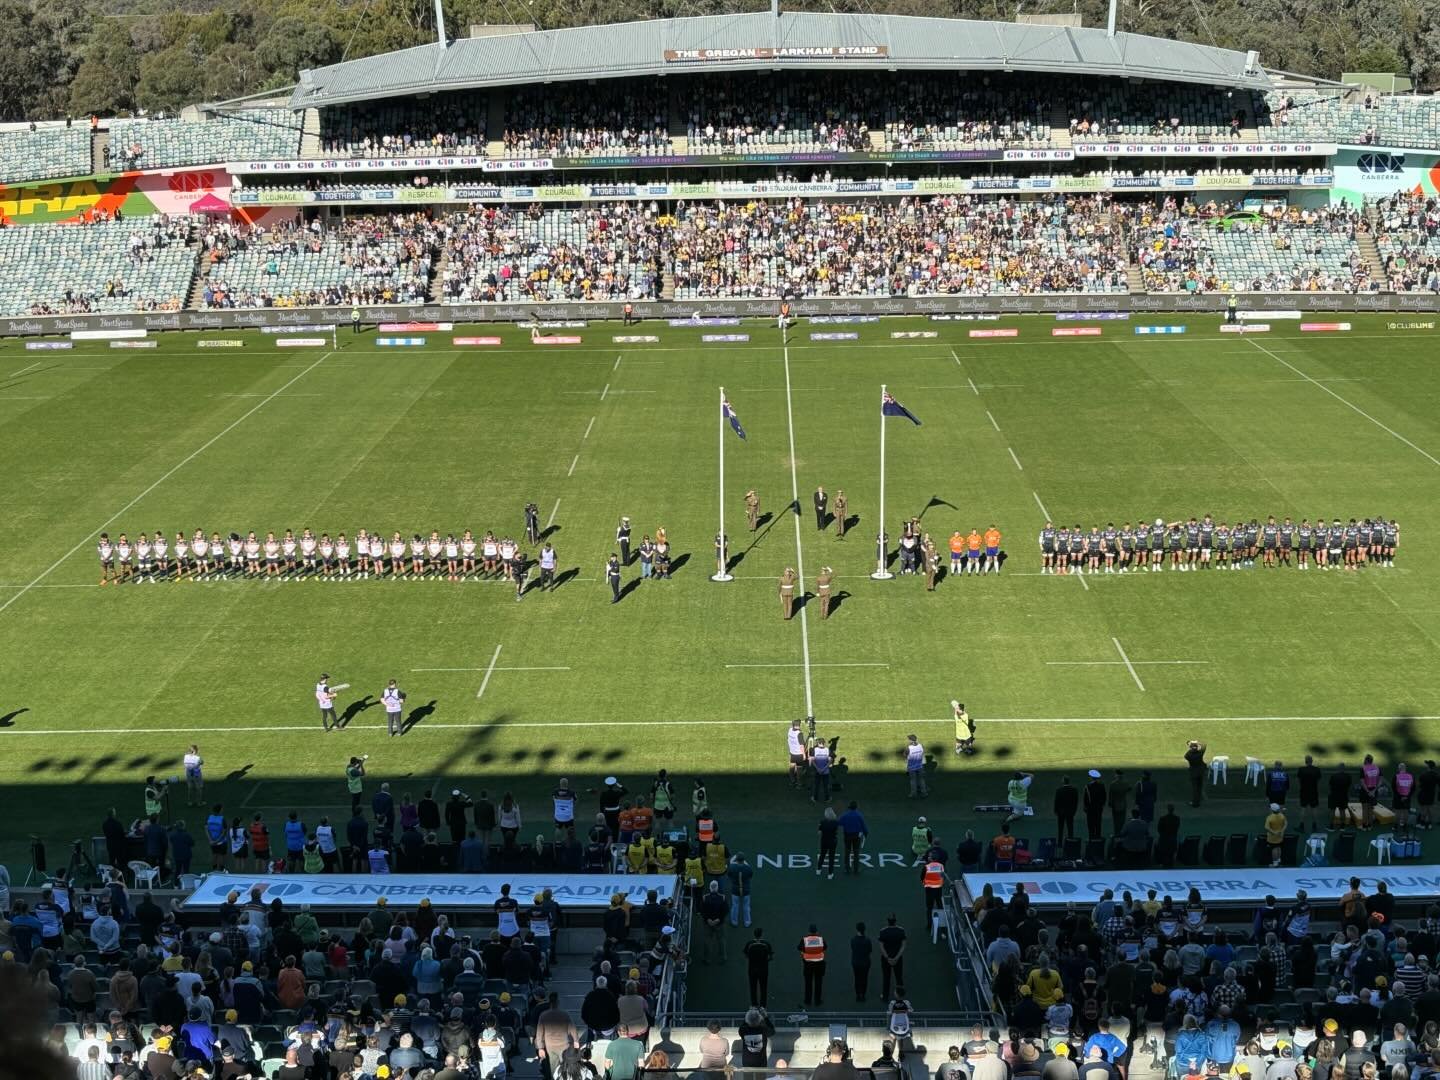 ANZAC Round at GIO Stadium Canberra today. Great to see the respect shown by both teams to walk out together to honour the spirit of the ANZACs.

Terrific to see the ACT Brumbies bounce back after a disappointing loss last week to defeat the previous